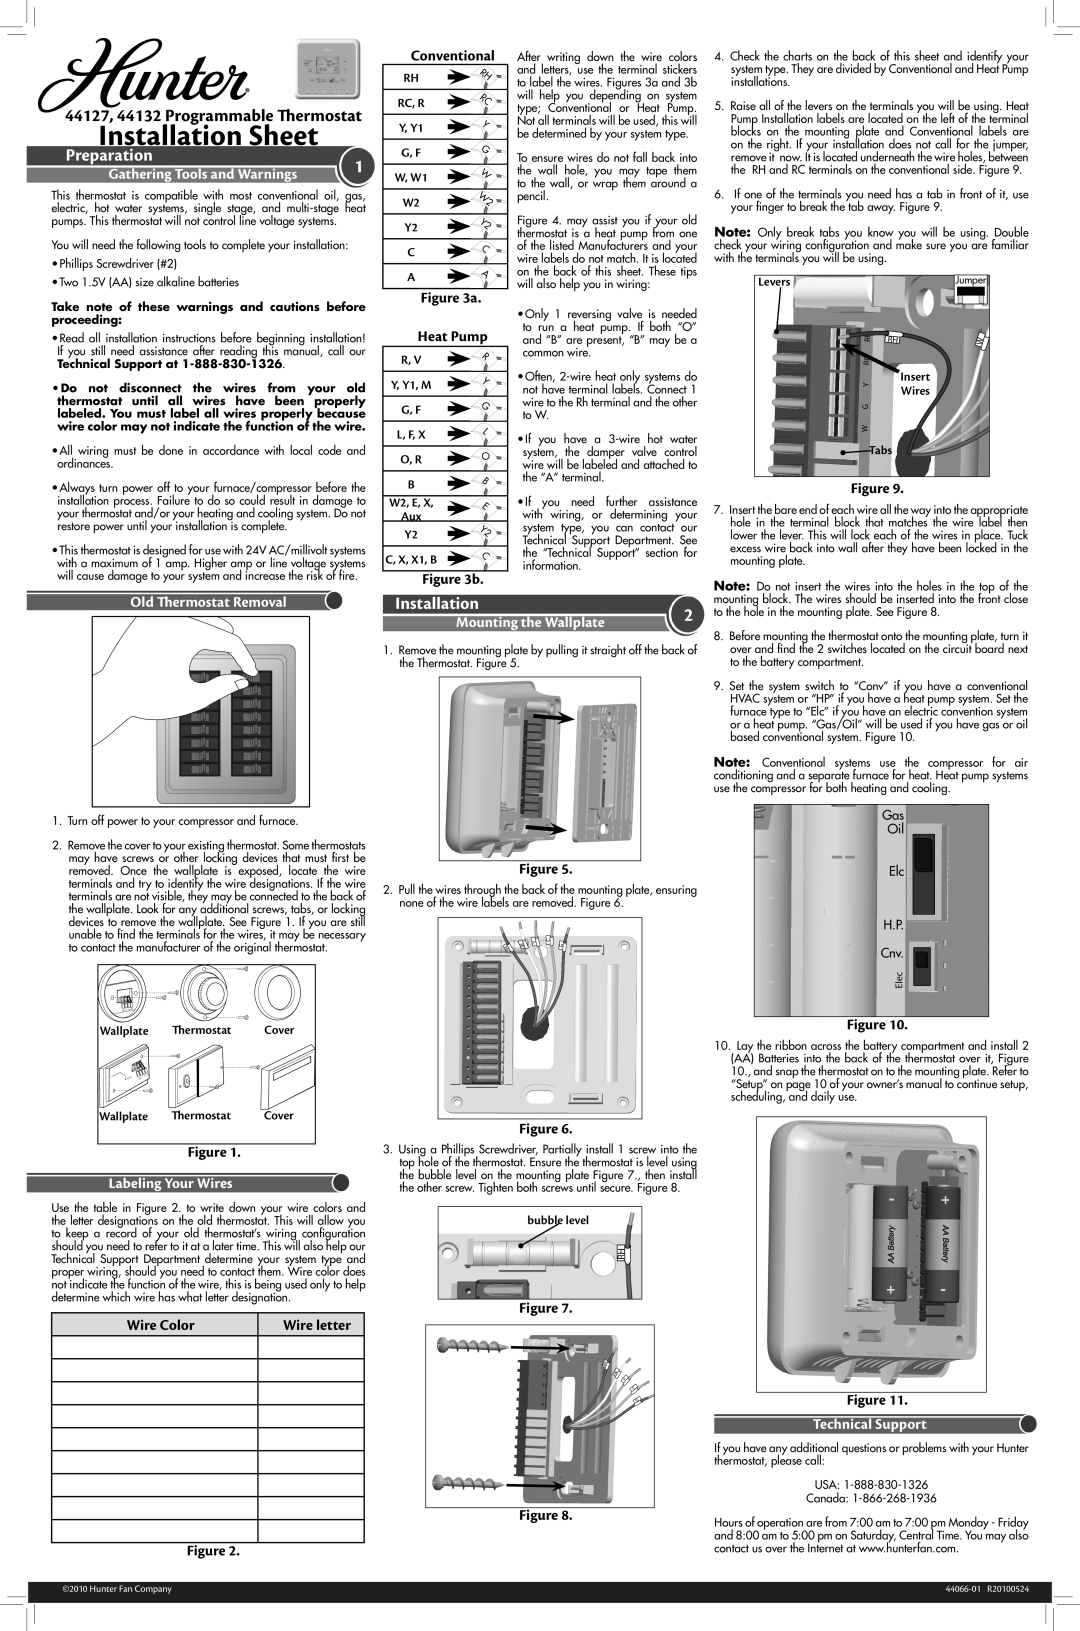 Hunter Fan installation instructions 44127, 44132 Programmable Thermostat, Gathering Tools and Warnings, Preparation 